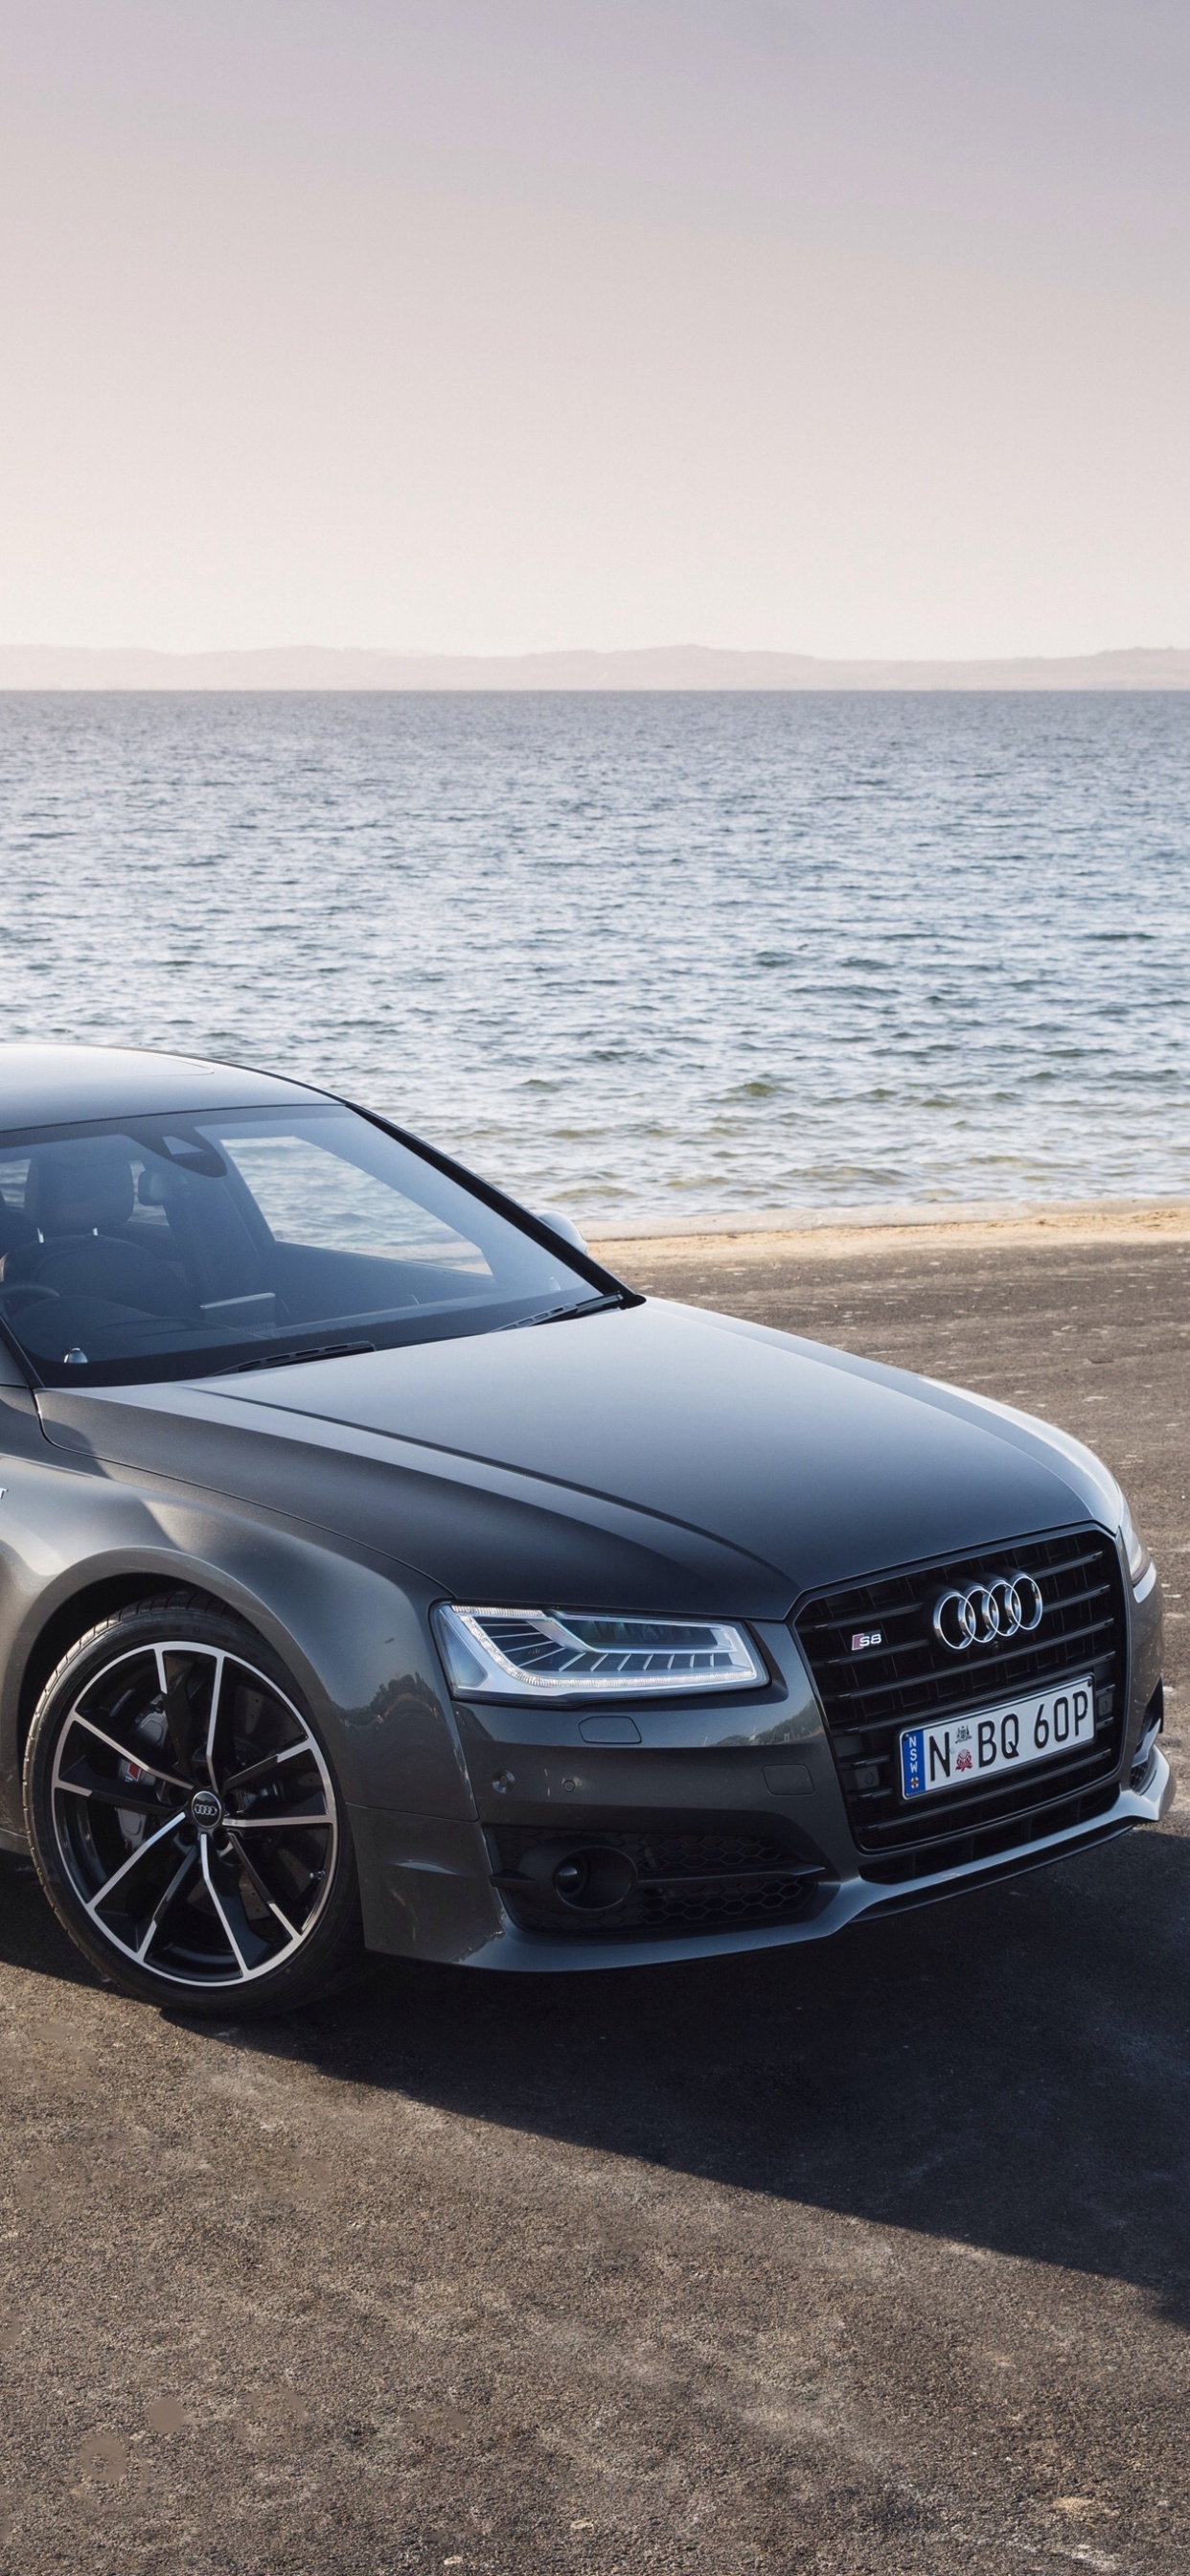 Black Audi a 4 on Beach During Daytime. Wallpaper in 1242x2688 Resolution